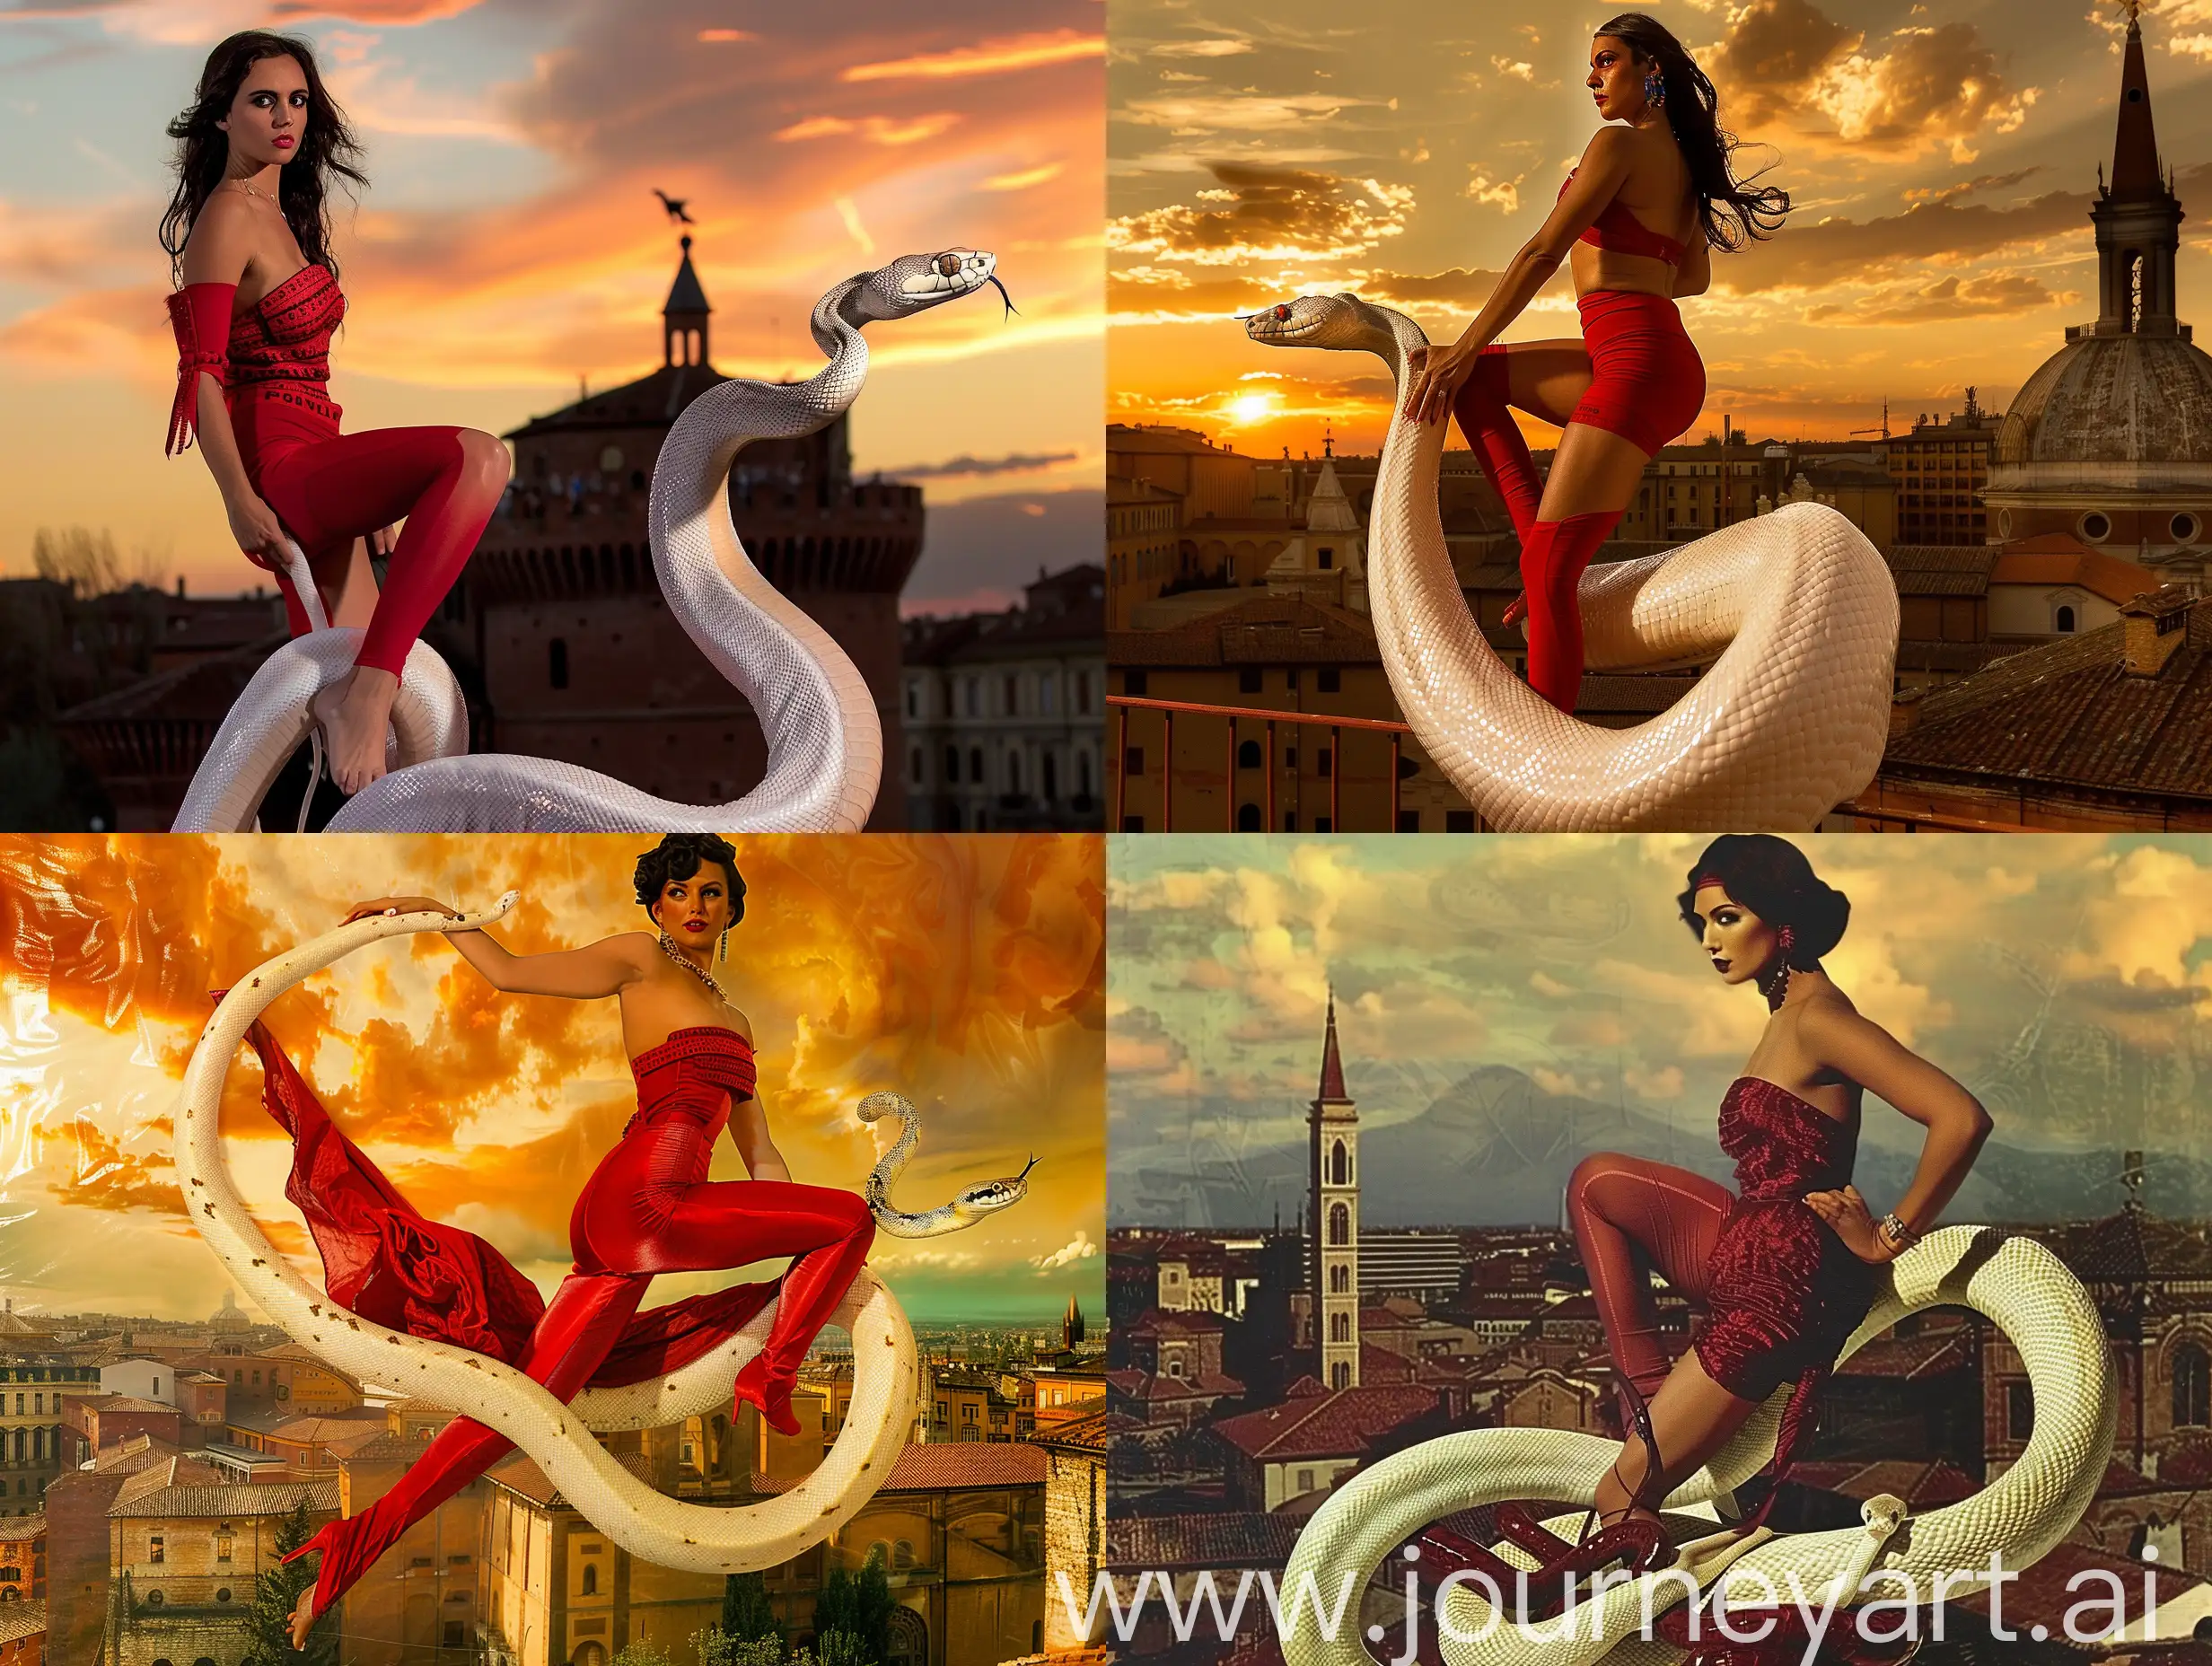 Moana Pozzi dresses in tight red  while riding a white snake, sunset, landscape  torre Asinelli Bologna, glamorous climate, art deco